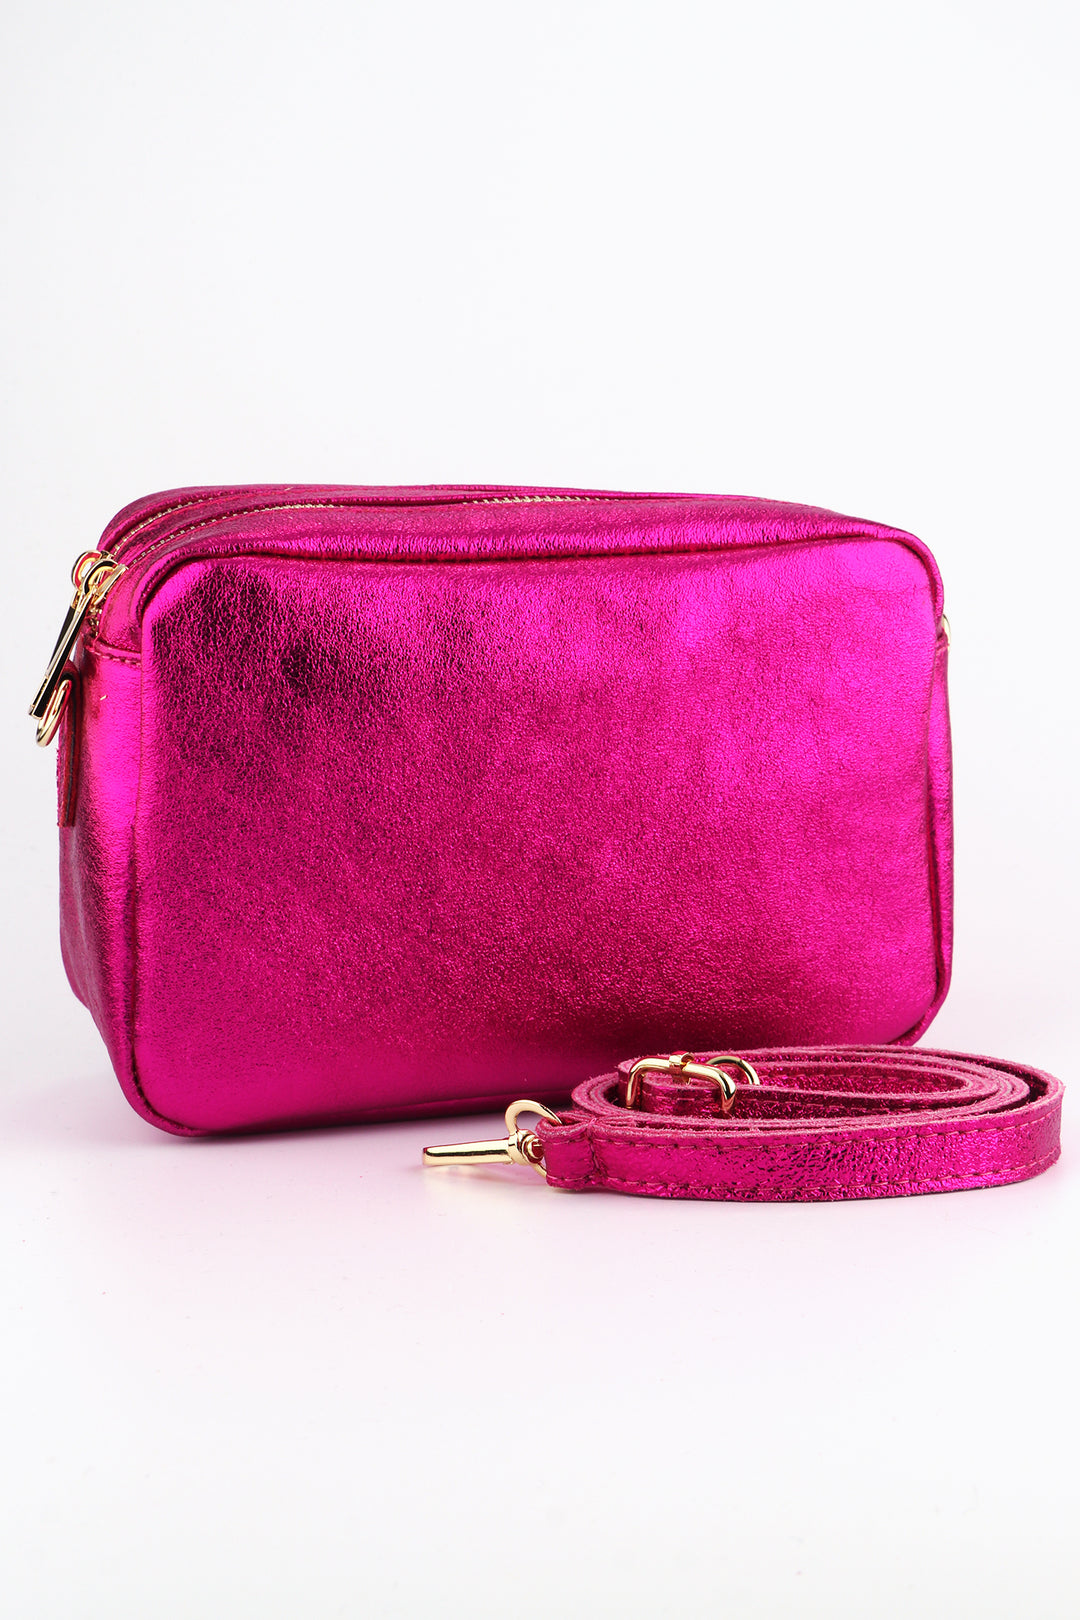 metallic pink leather cross body camera bag with a matching detachable bag strap and two zip closing compartments